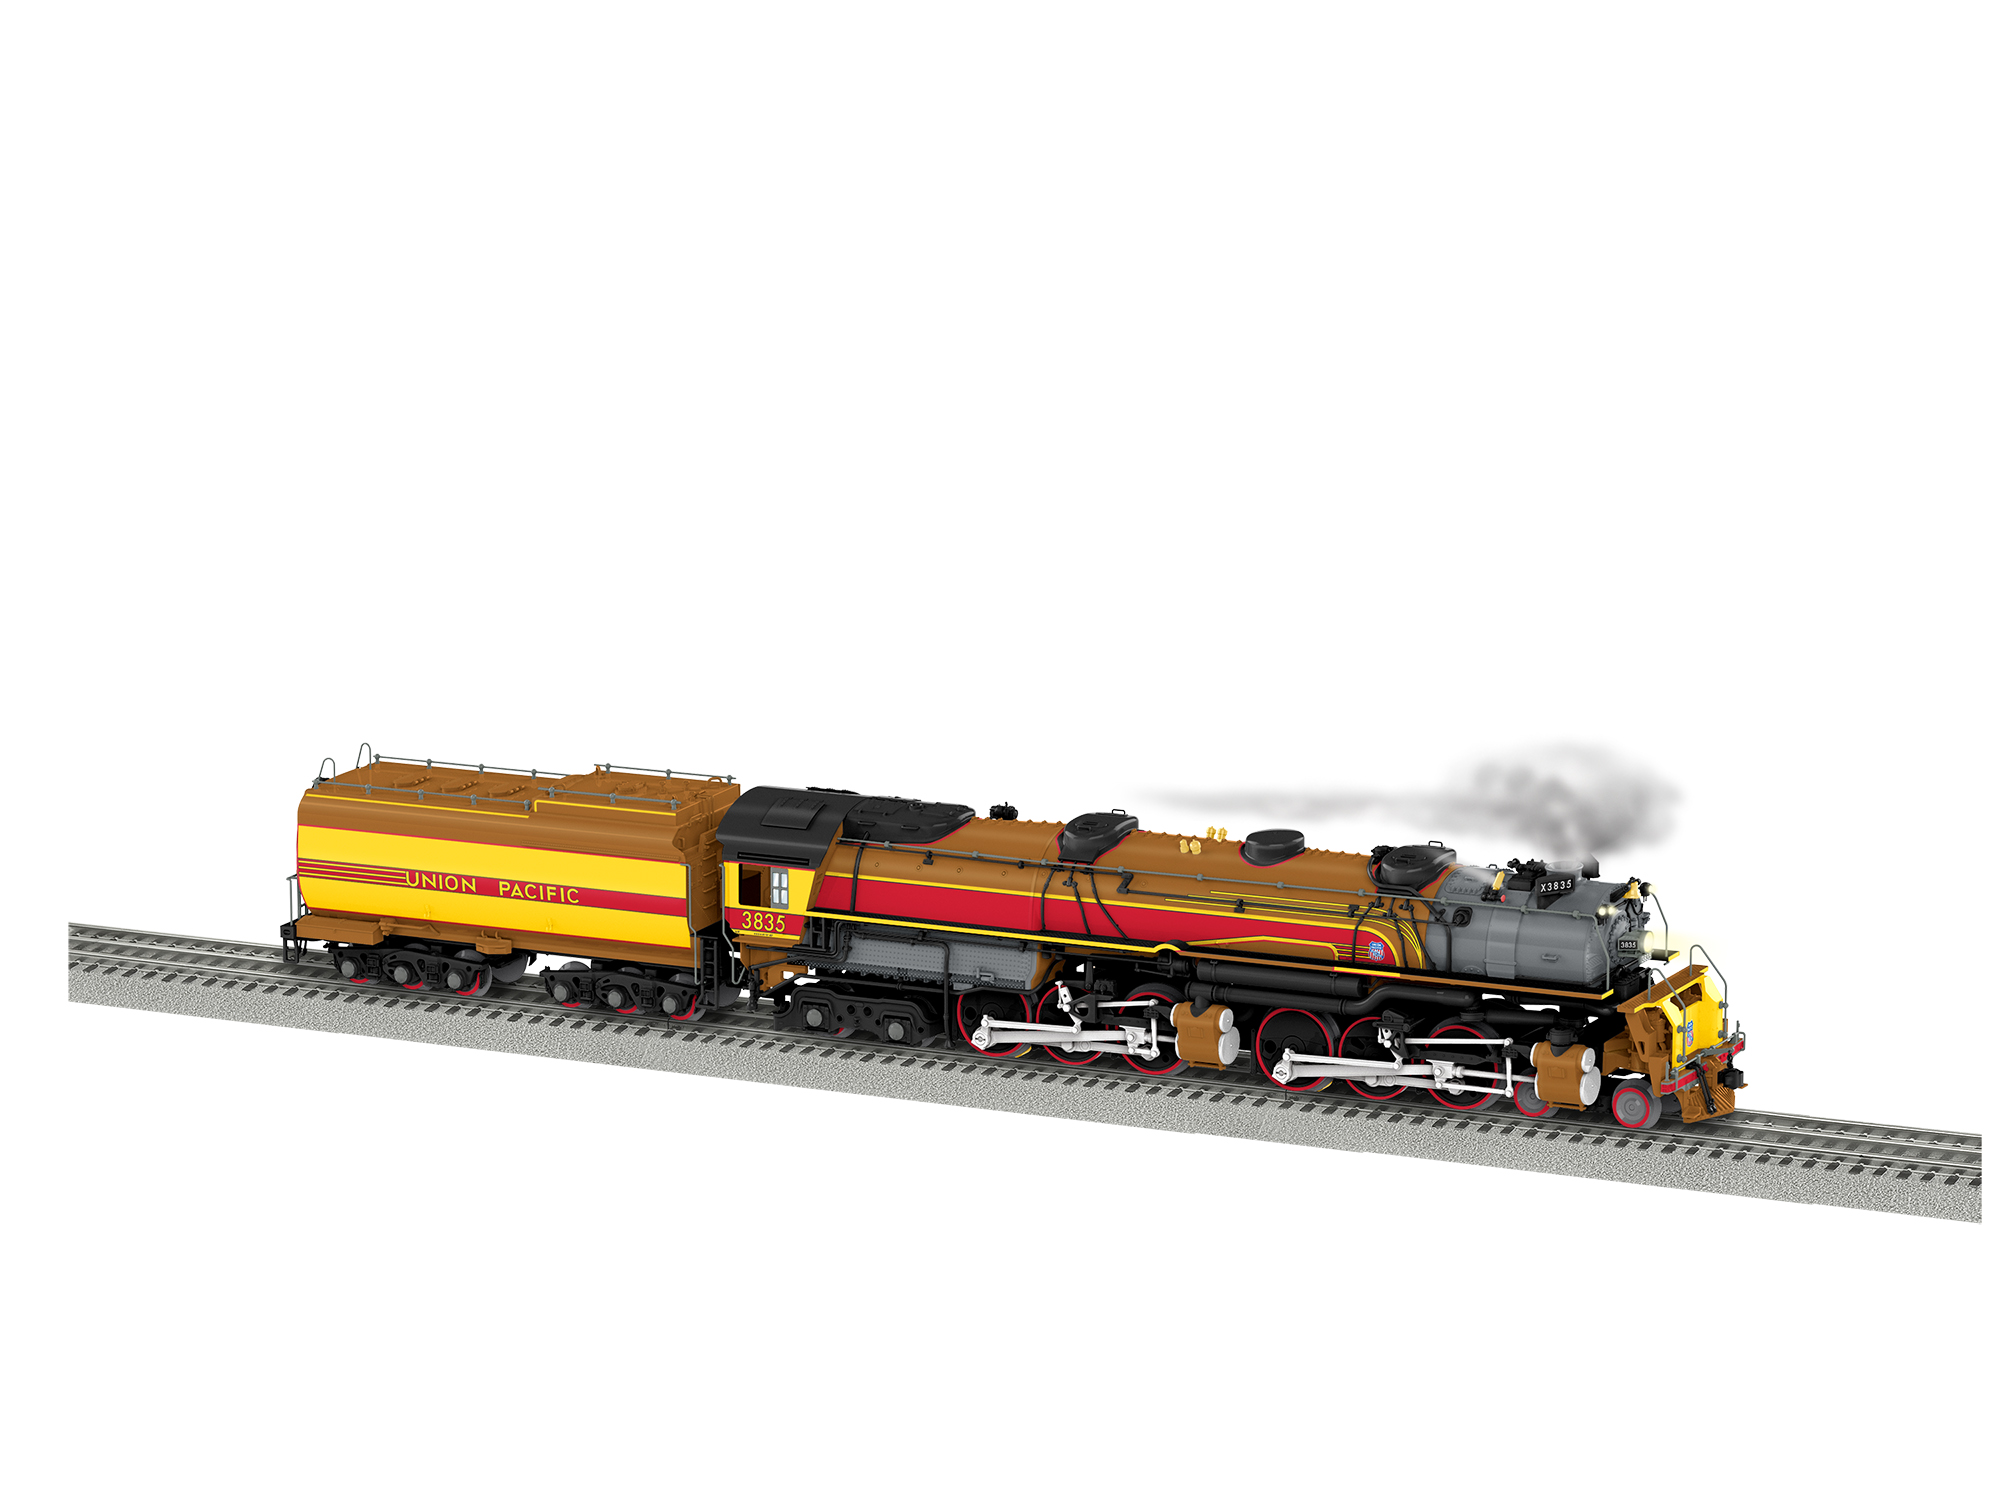 UNION PACIFIC LEGACY CHALLENGER #3819